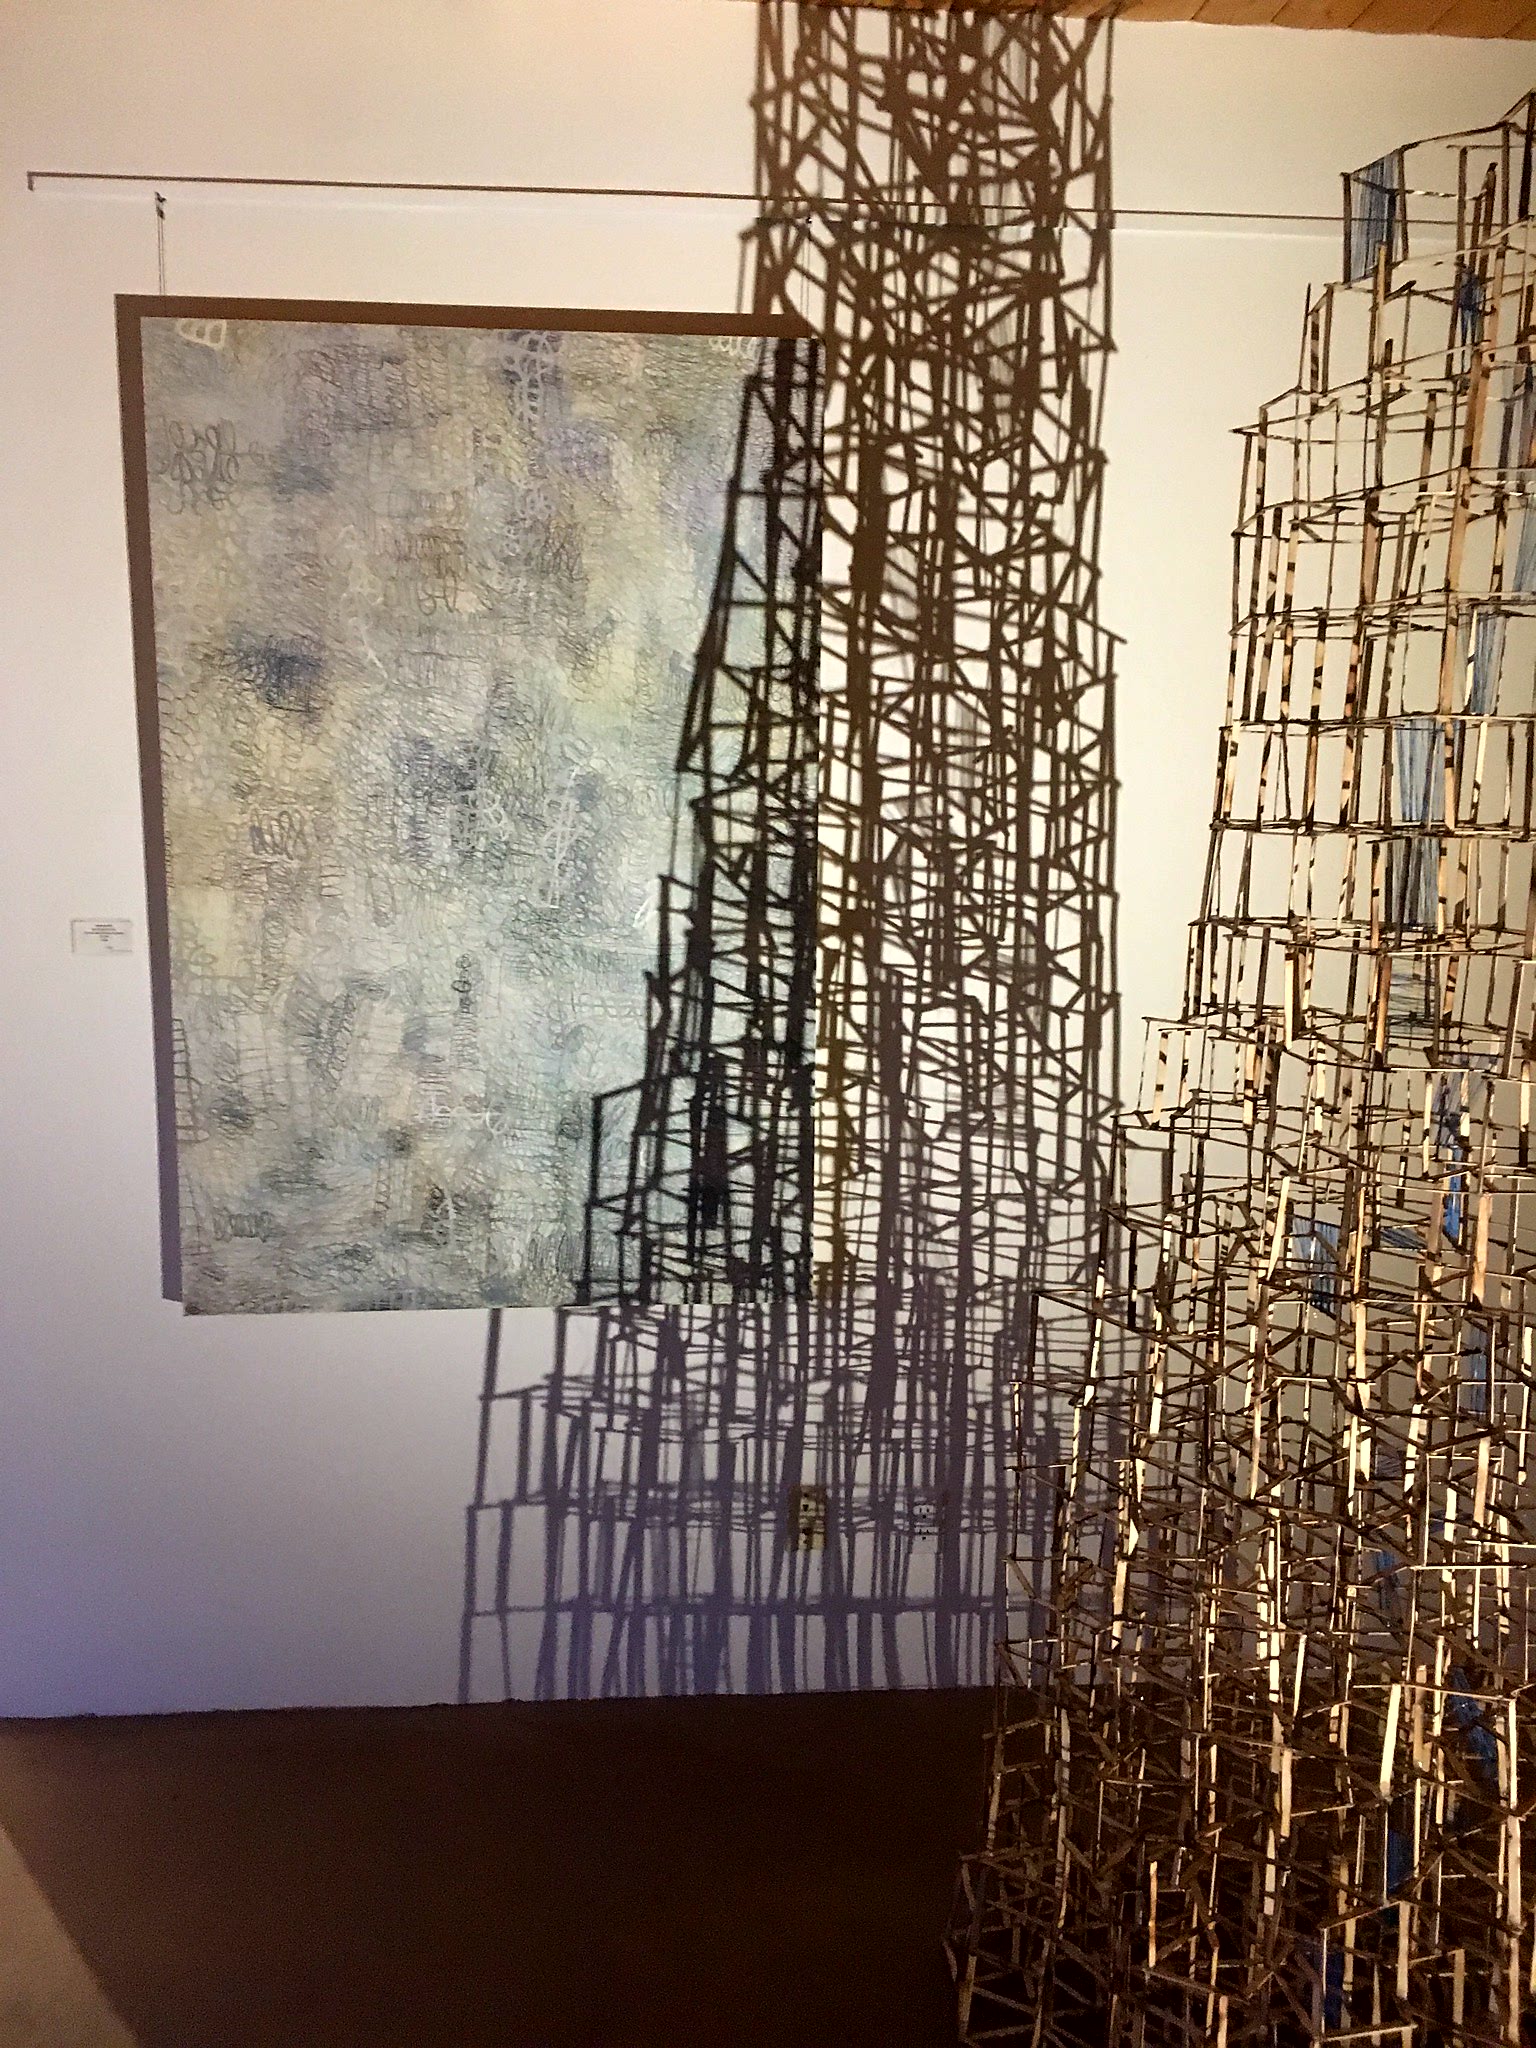 tower with cerulean sky, 2018, popsicle stick sculpture with cerulean blue thread, cast shadow drawing. Shown in gallery with Blair Vaughn-Gruler painting